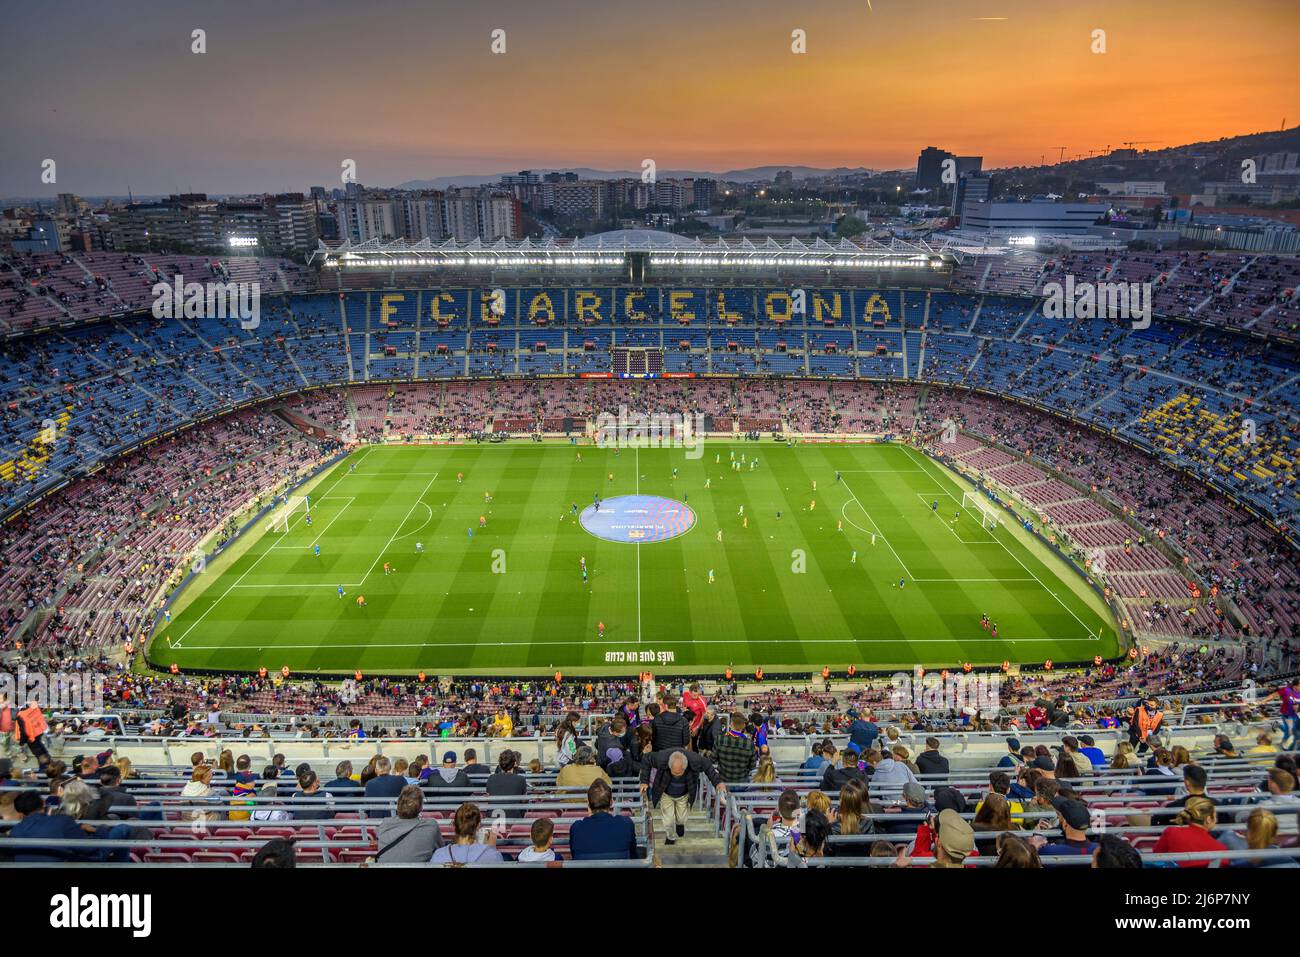 Panoramic view of the Camp Nou stadium at sunset, on a match day of the FC Barcelona first team (Barcelona, Catalonia, Spain)  ESP: Vista del Camp Nou Stock Photo